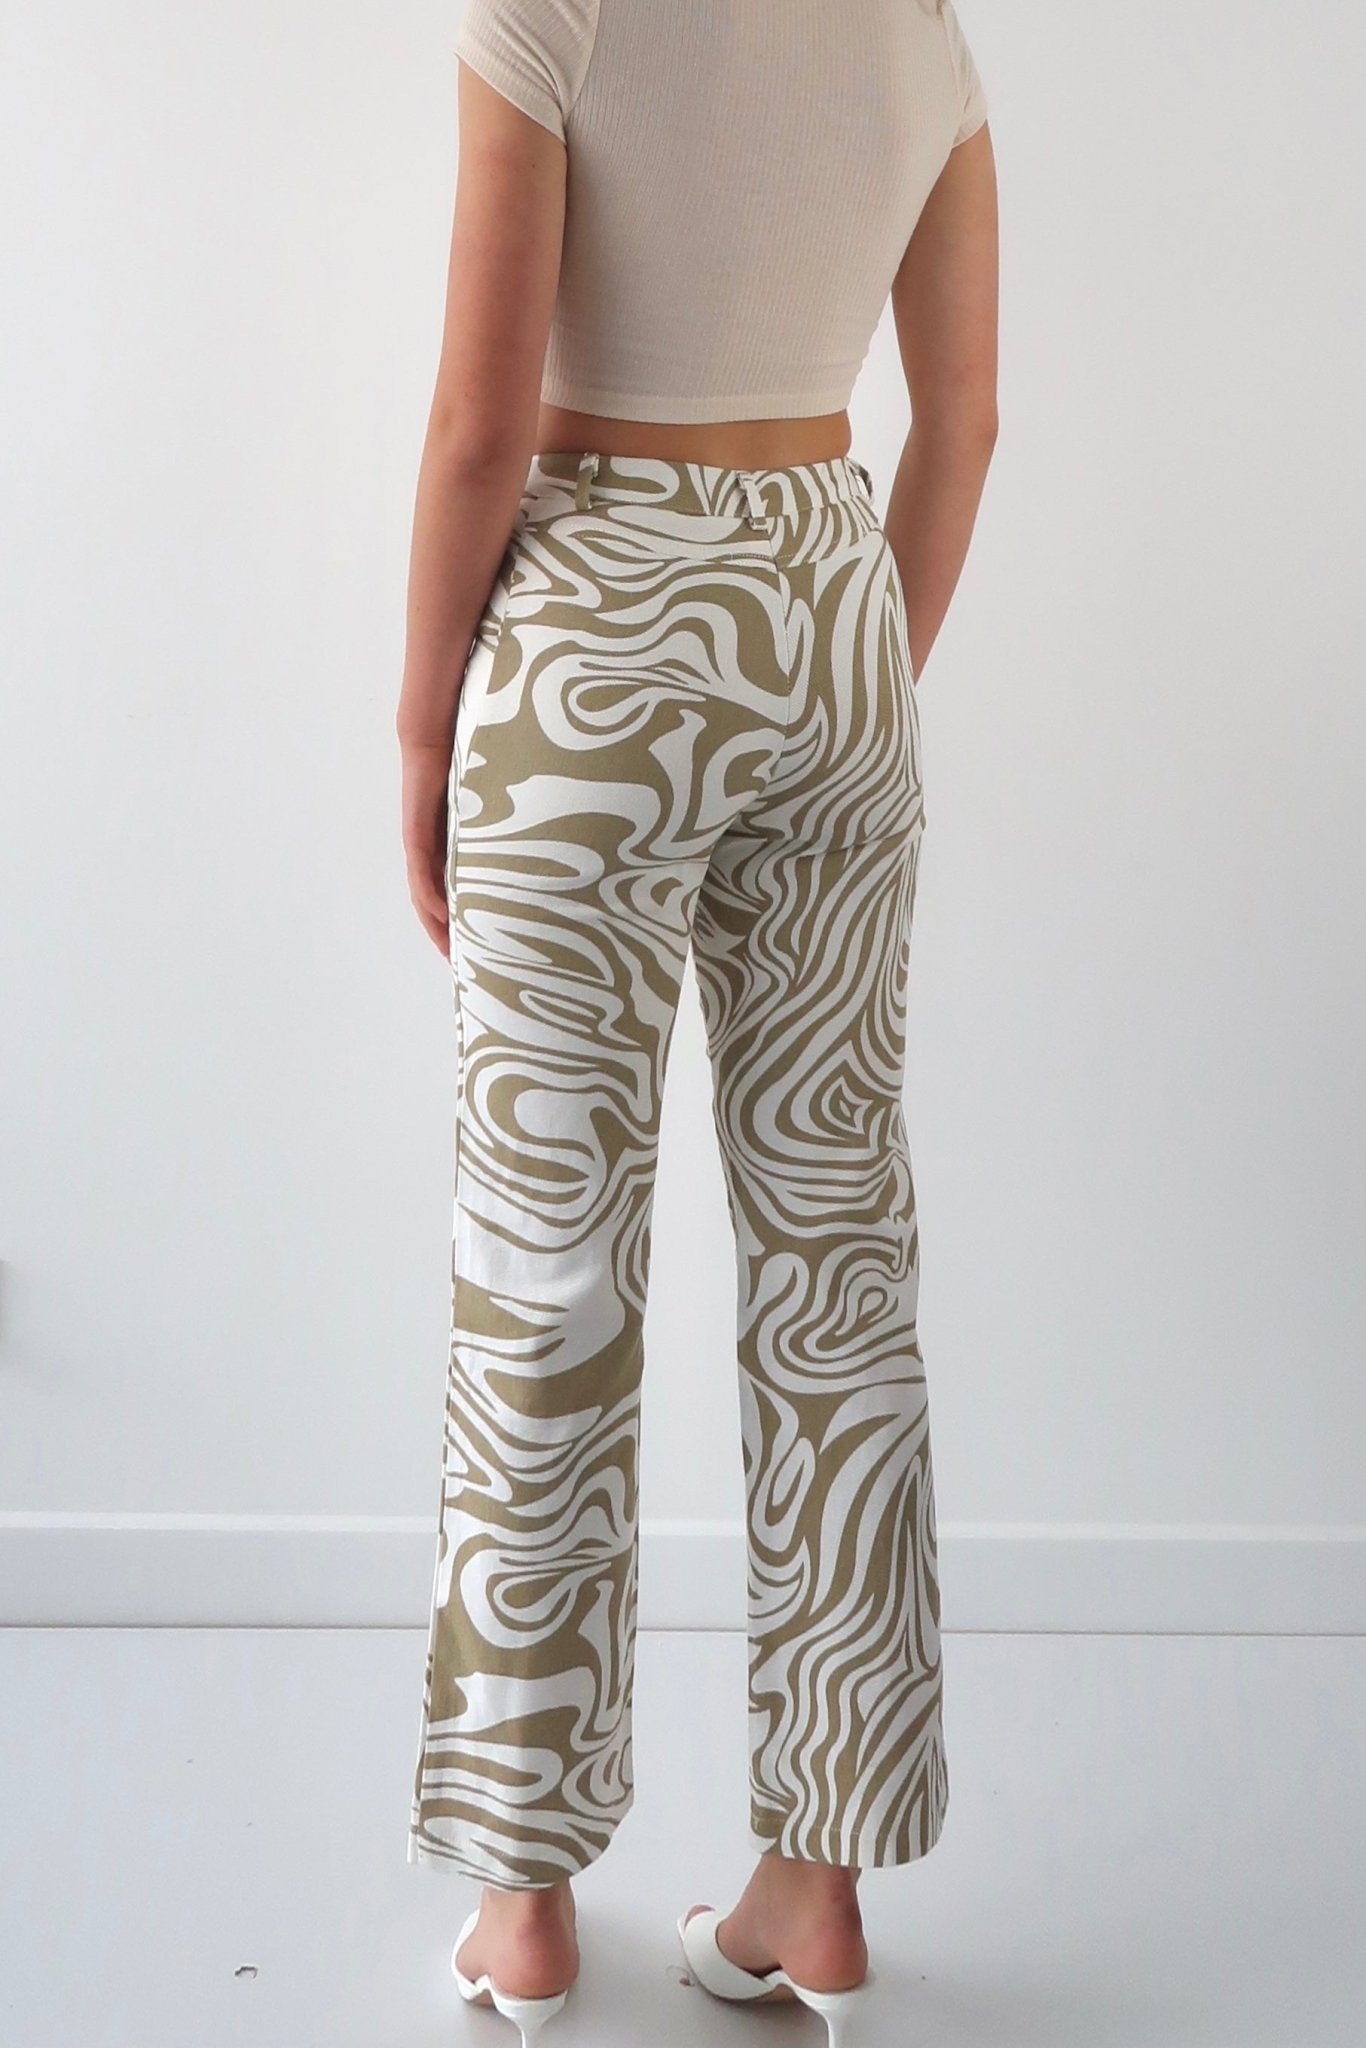 Indie wave pattern trousers - SCG_COLLECTIONSBottom